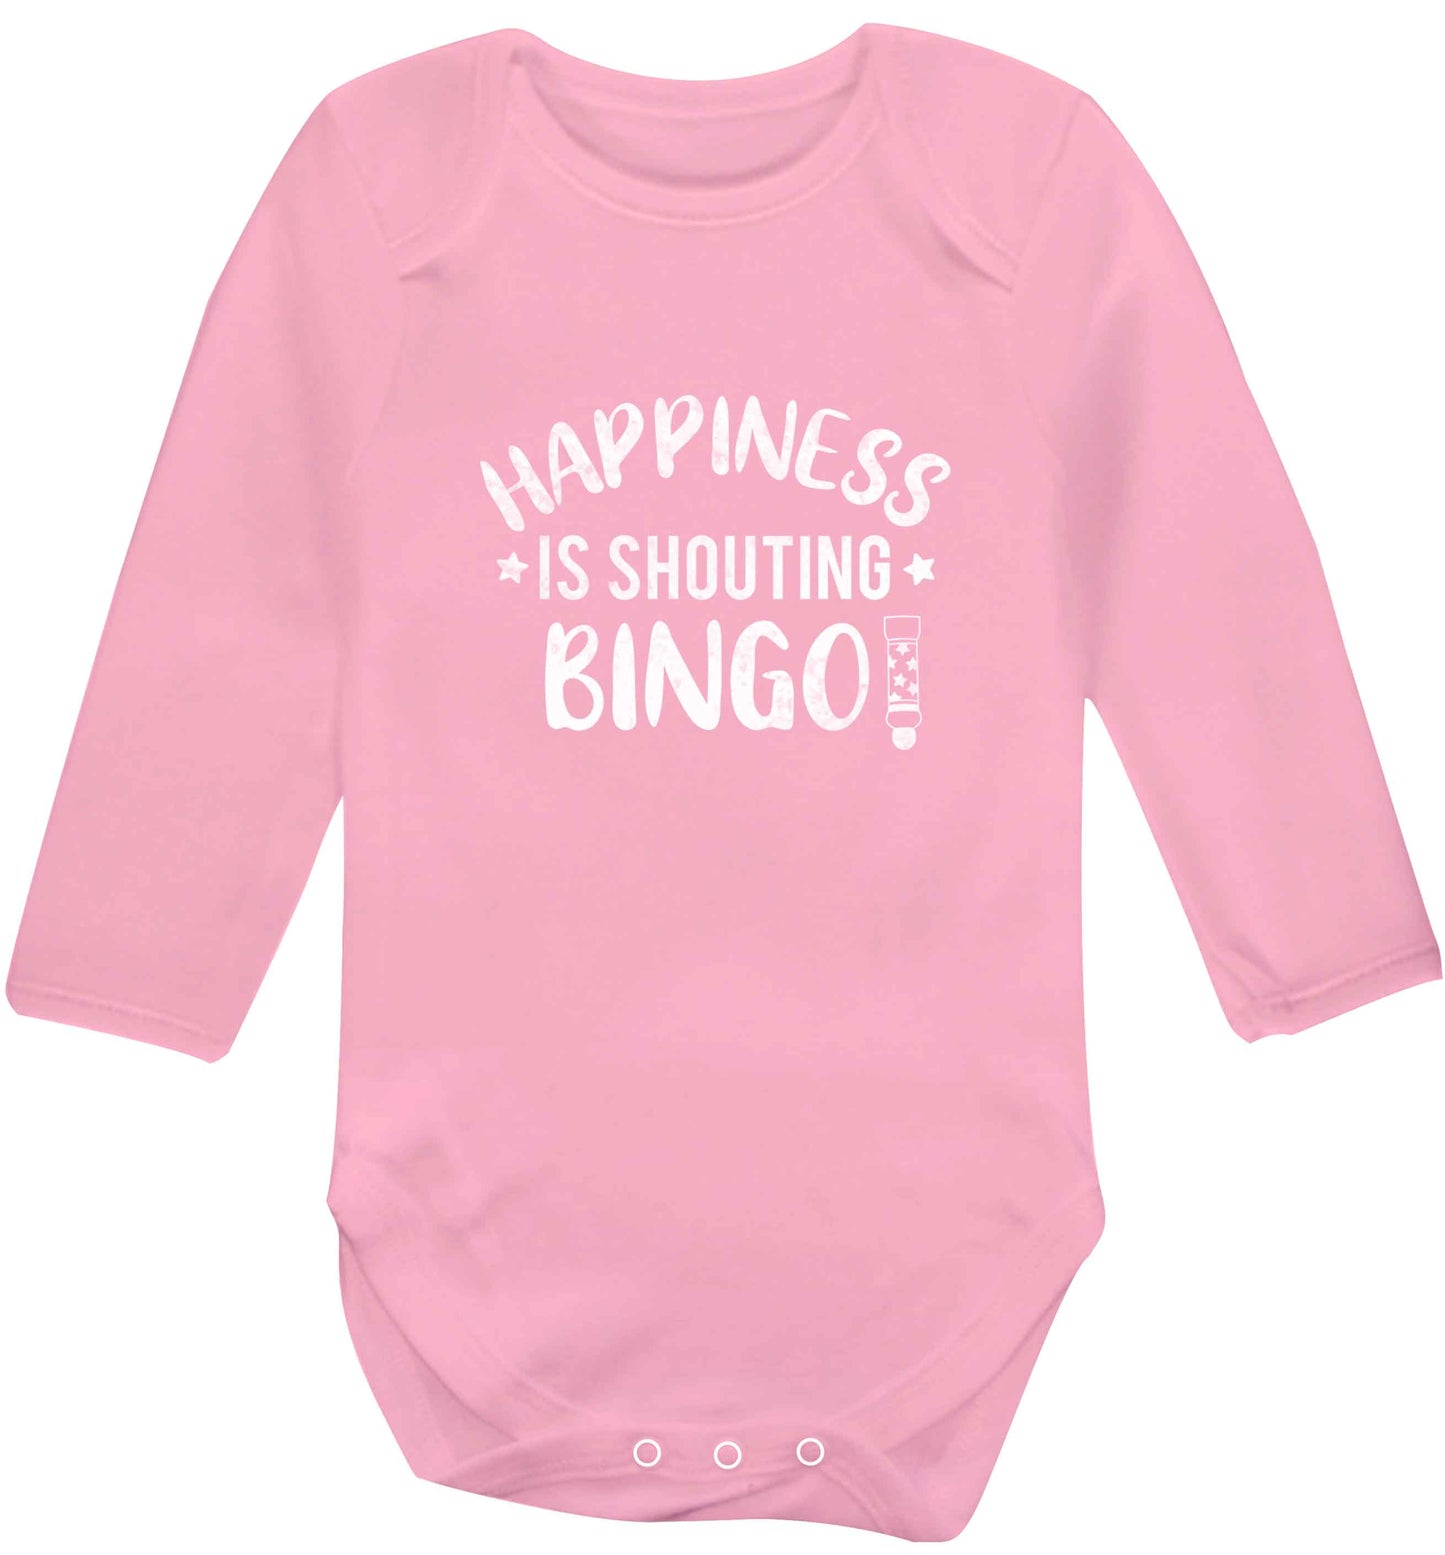 Happiness is shouting bingo! baby vest long sleeved pale pink 6-12 months